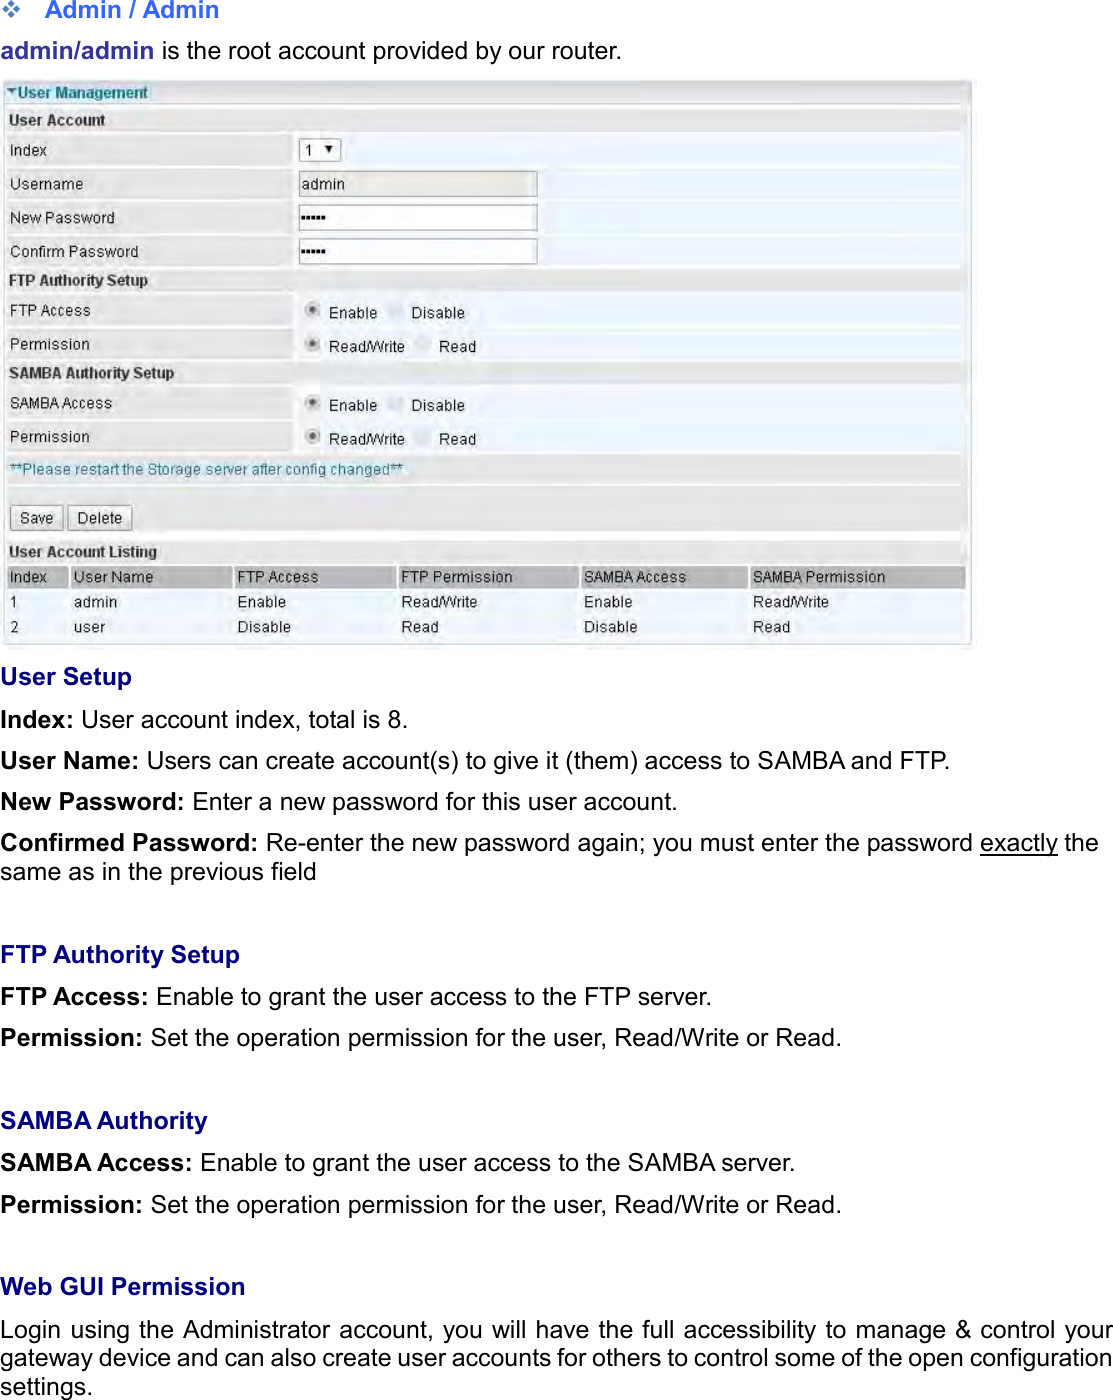     Admin / Admin admin/admin is the root account provided by our router.  User Setup Index: User account index, total is 8. User Name: Users can create account(s) to give it (them) access to SAMBA and FTP.  New Password: Enter a new password for this user account.  Confirmed Password: Re-enter the new password again; you must enter the password exactly the same as in the previous field  FTP Authority Setup FTP Access: Enable to grant the user access to the FTP server. Permission: Set the operation permission for the user, Read/Write or Read.  SAMBA Authority SAMBA Access: Enable to grant the user access to the SAMBA server. Permission: Set the operation permission for the user, Read/Write or Read.  Web GUI Permission Login using the Administrator account, you will have the full accessibility to manage &amp; control your gateway device and can also create user accounts for others to control some of the open configuration settings.  